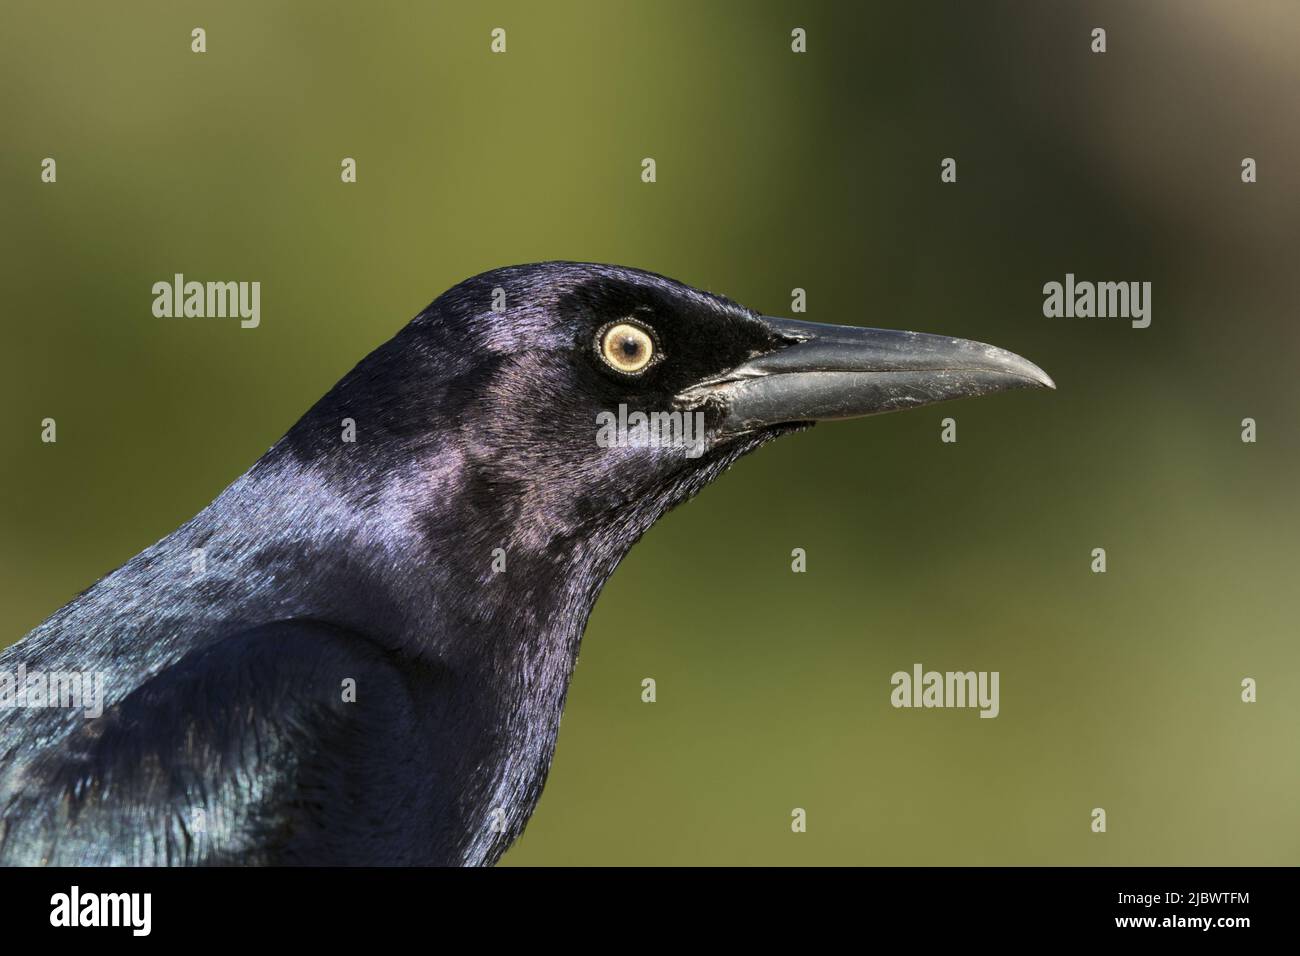 Close up portrait of Common Grackle against green bokeh background with copy space Stock Photo